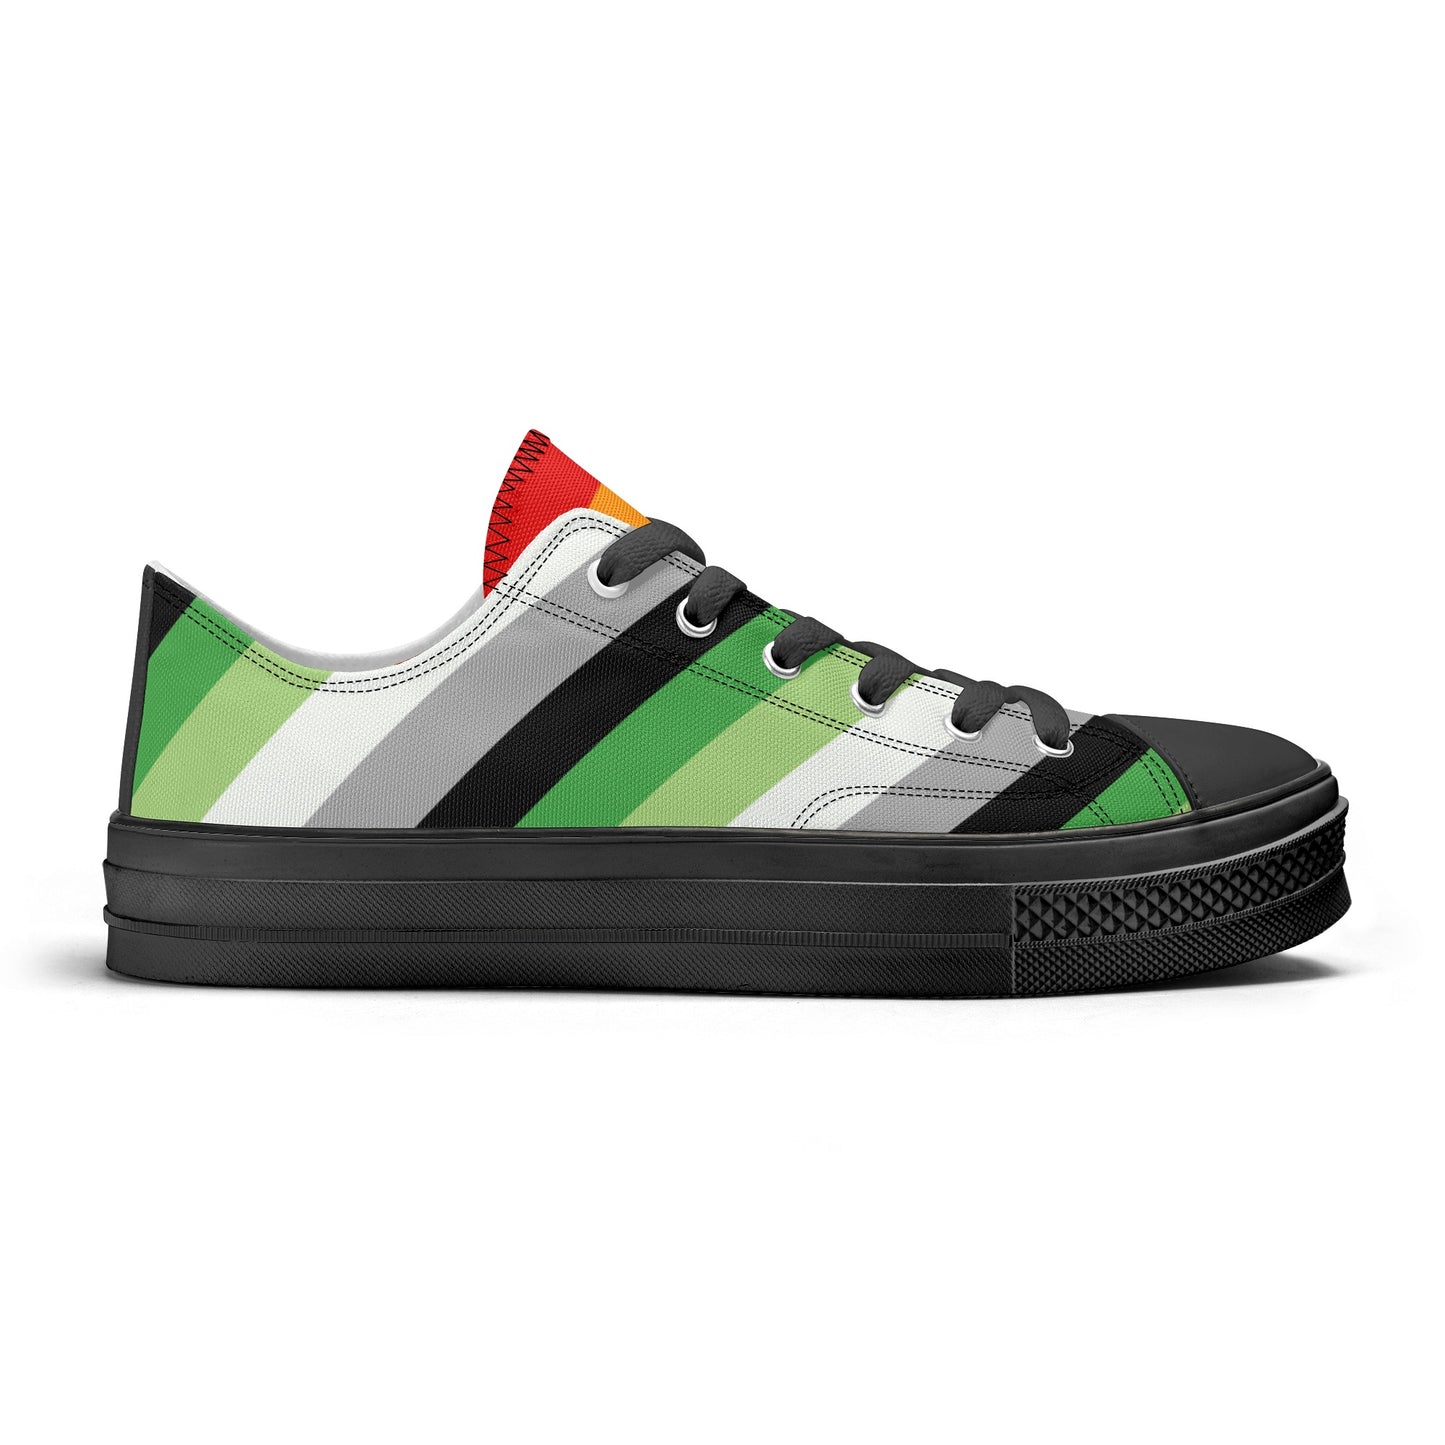 Aromantic Pride Collection - Womens Classic Low Top Canvas Shoes for the LGBTQIA+ community